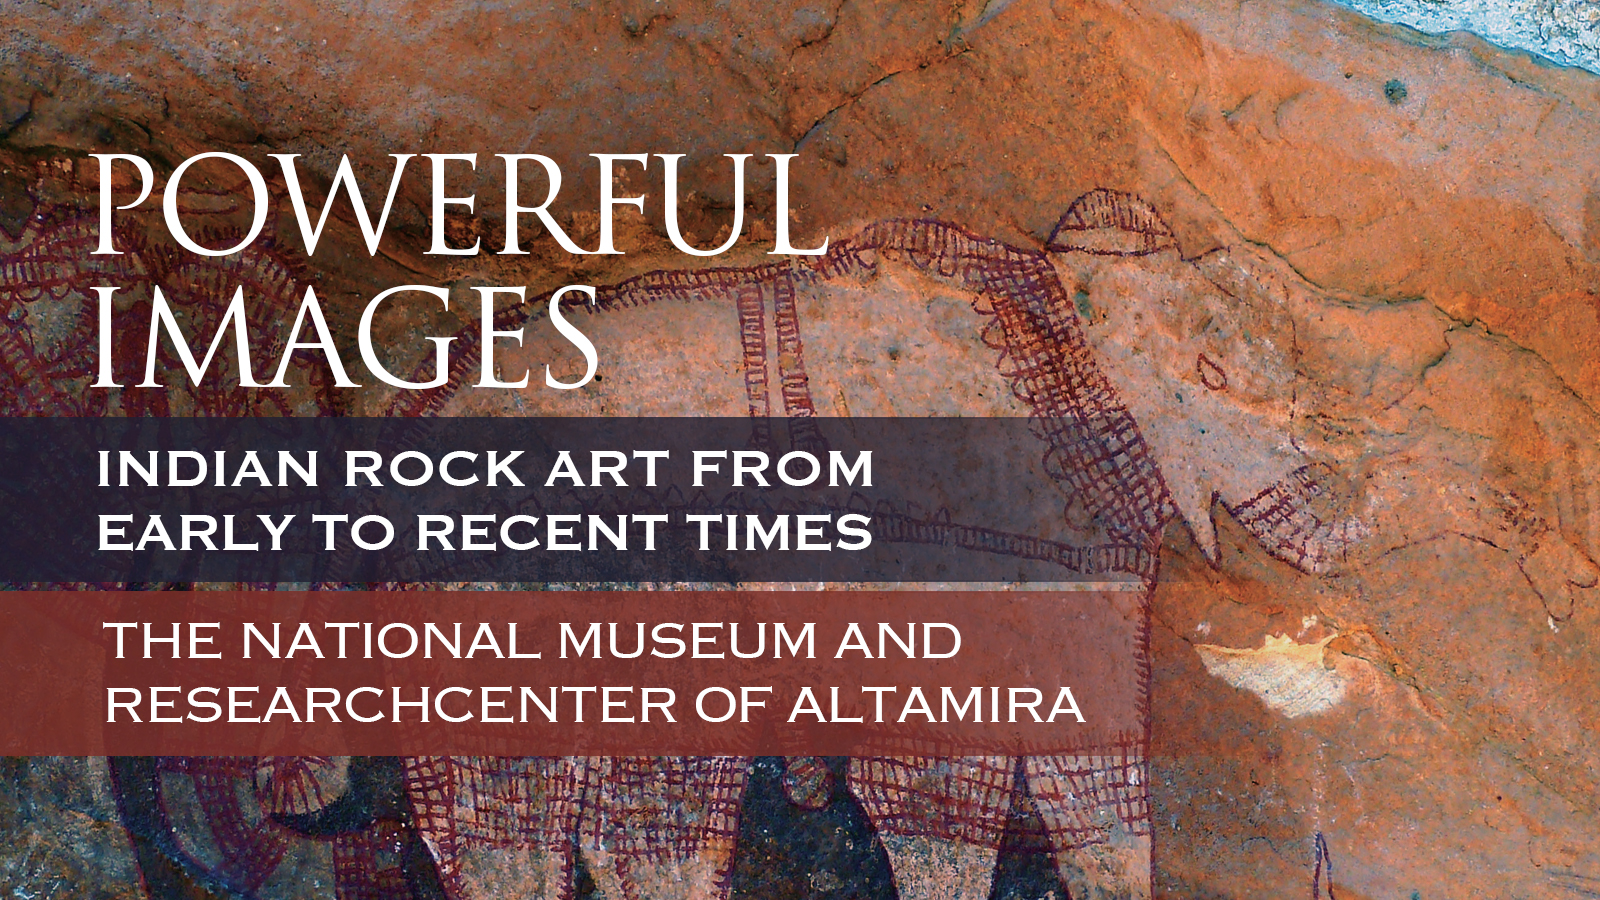 Powerful Images Indian India Rock Art from Early to Recent Times